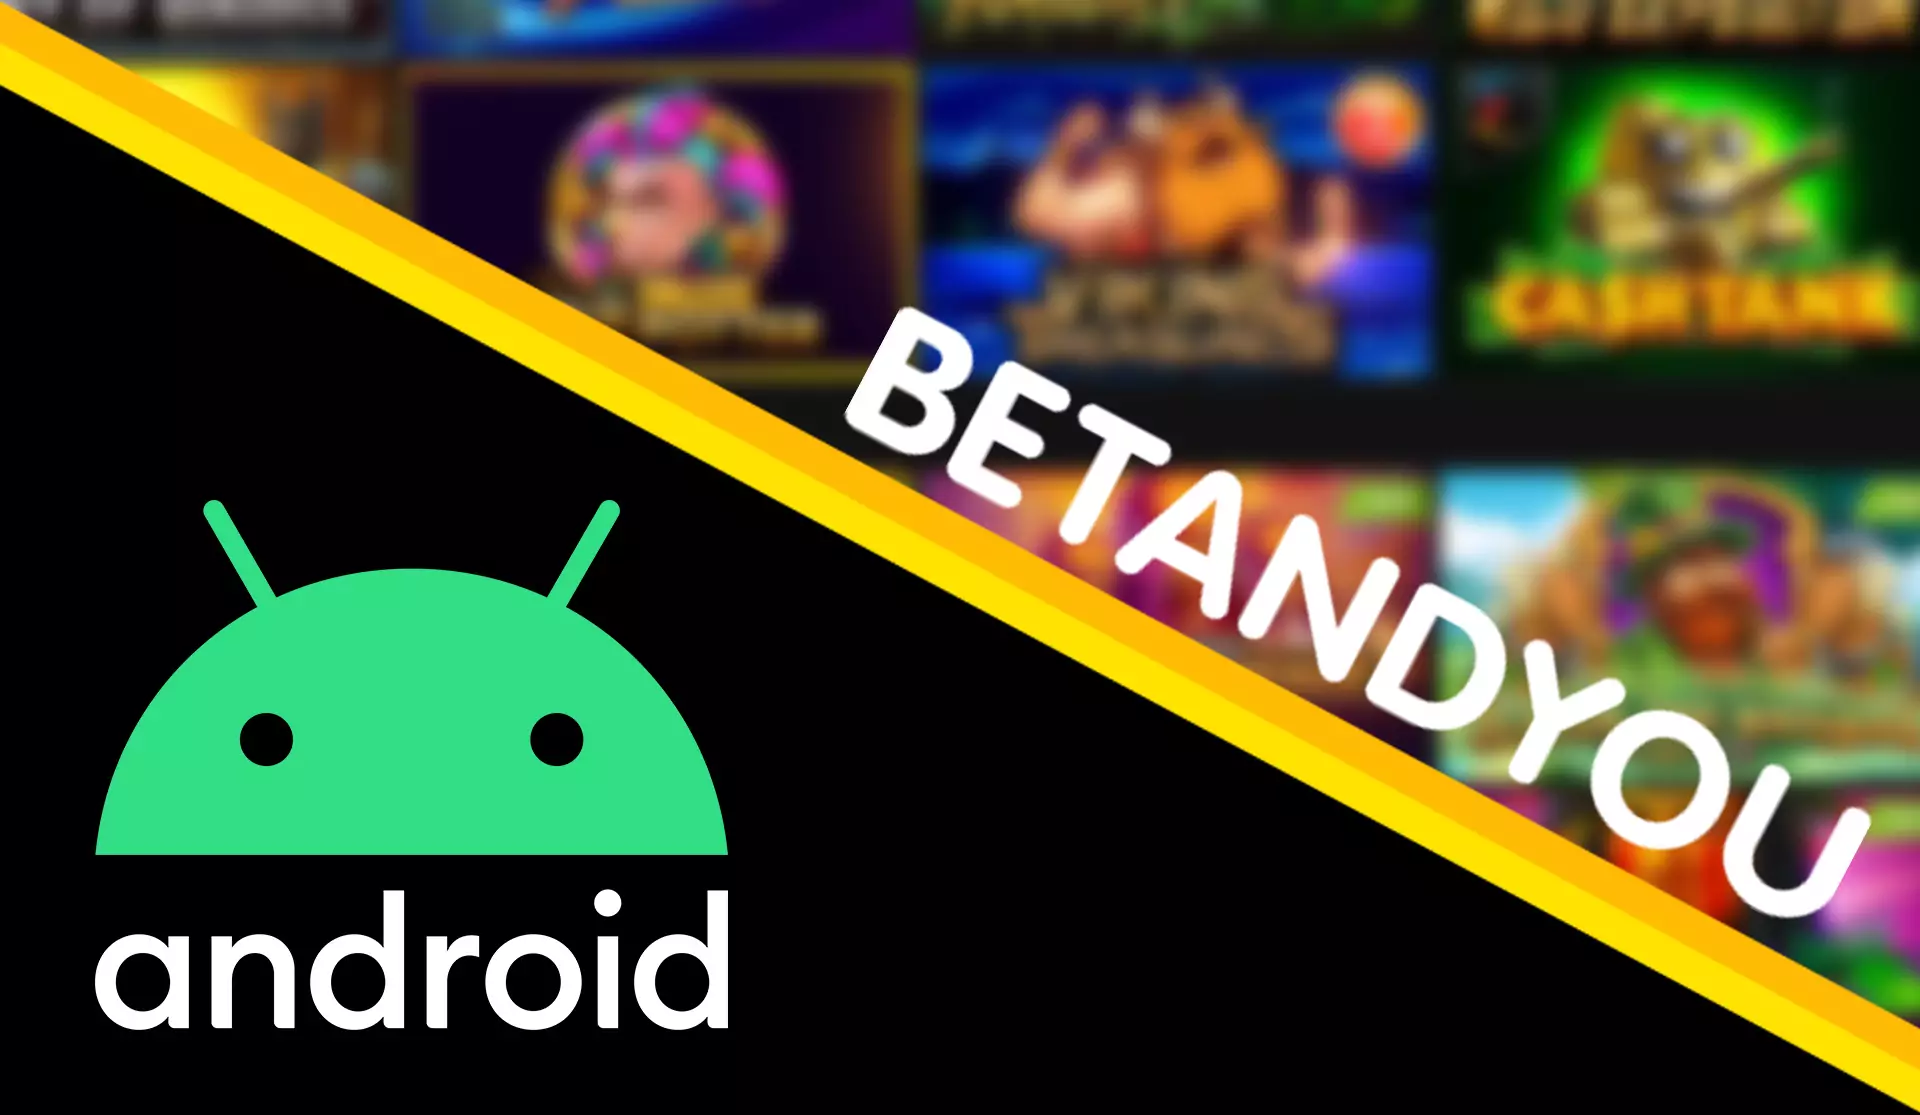 The Betandyou app works great on most Android smartphones.